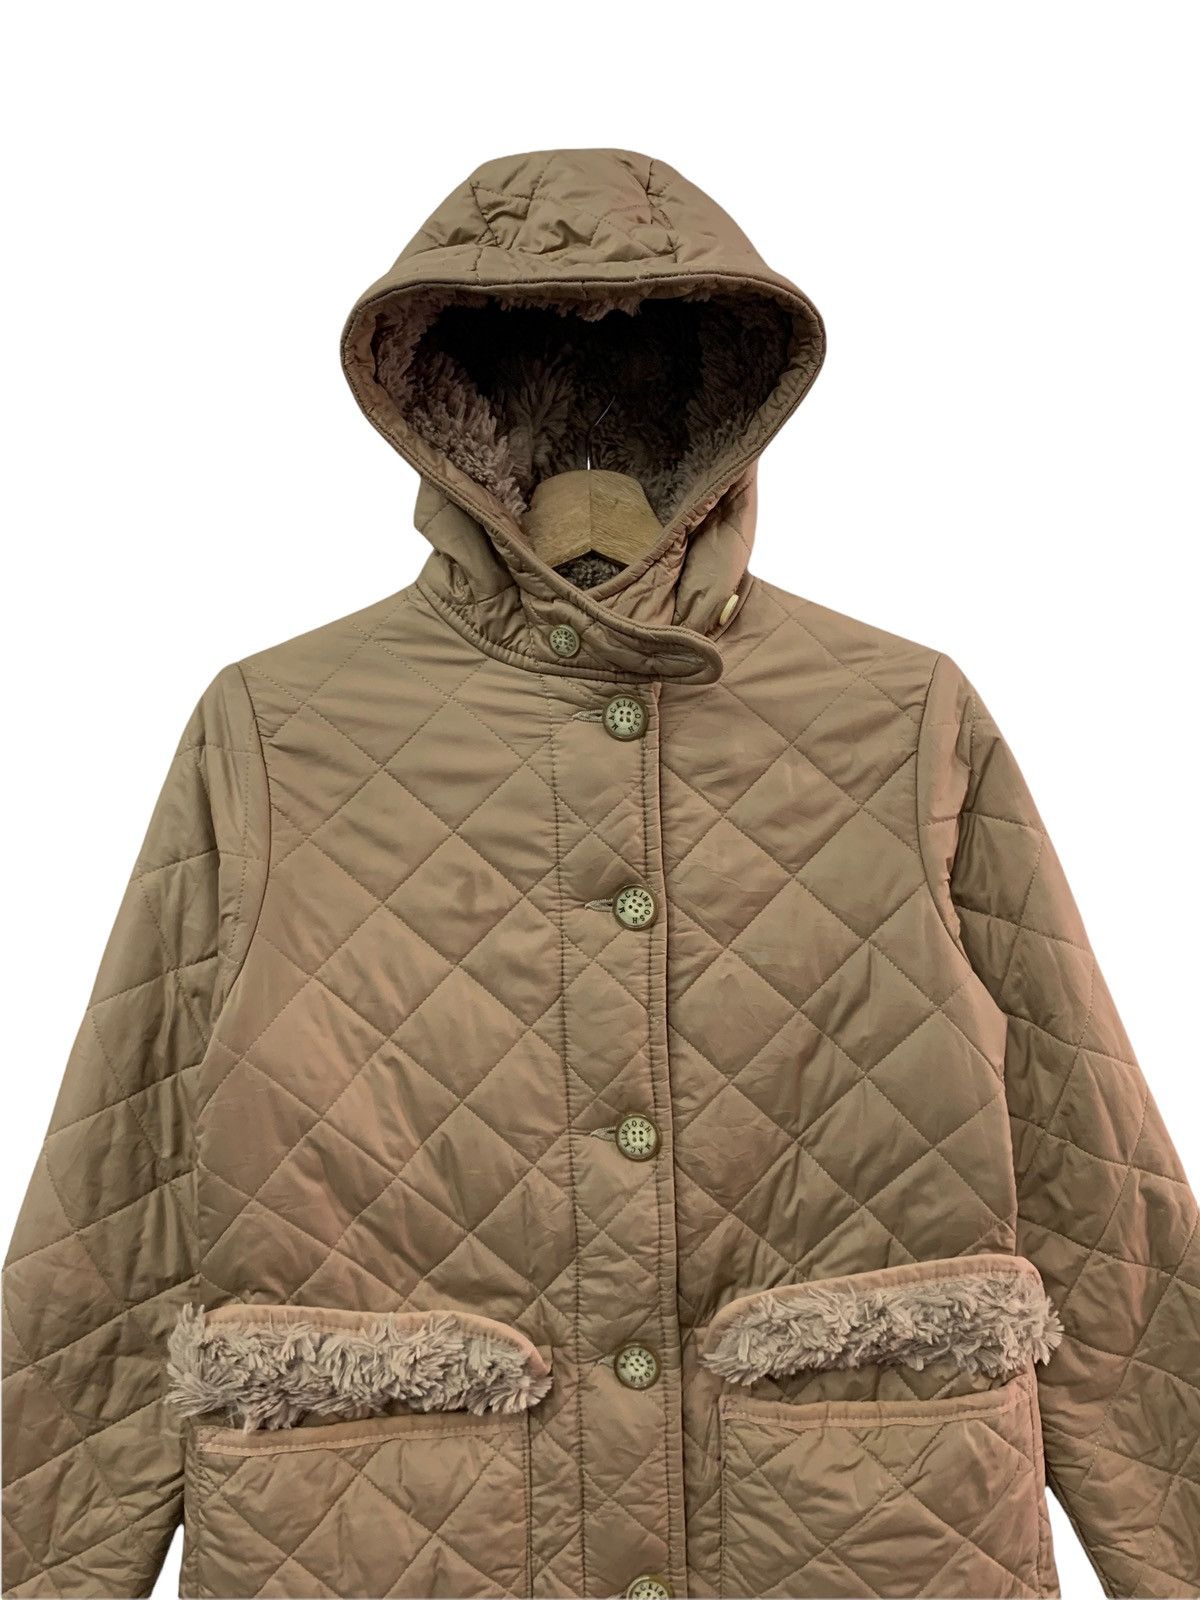 🔥MACKINTOSH SCOTLAND QUILTED FUR LINED LONG JACKETS - 6